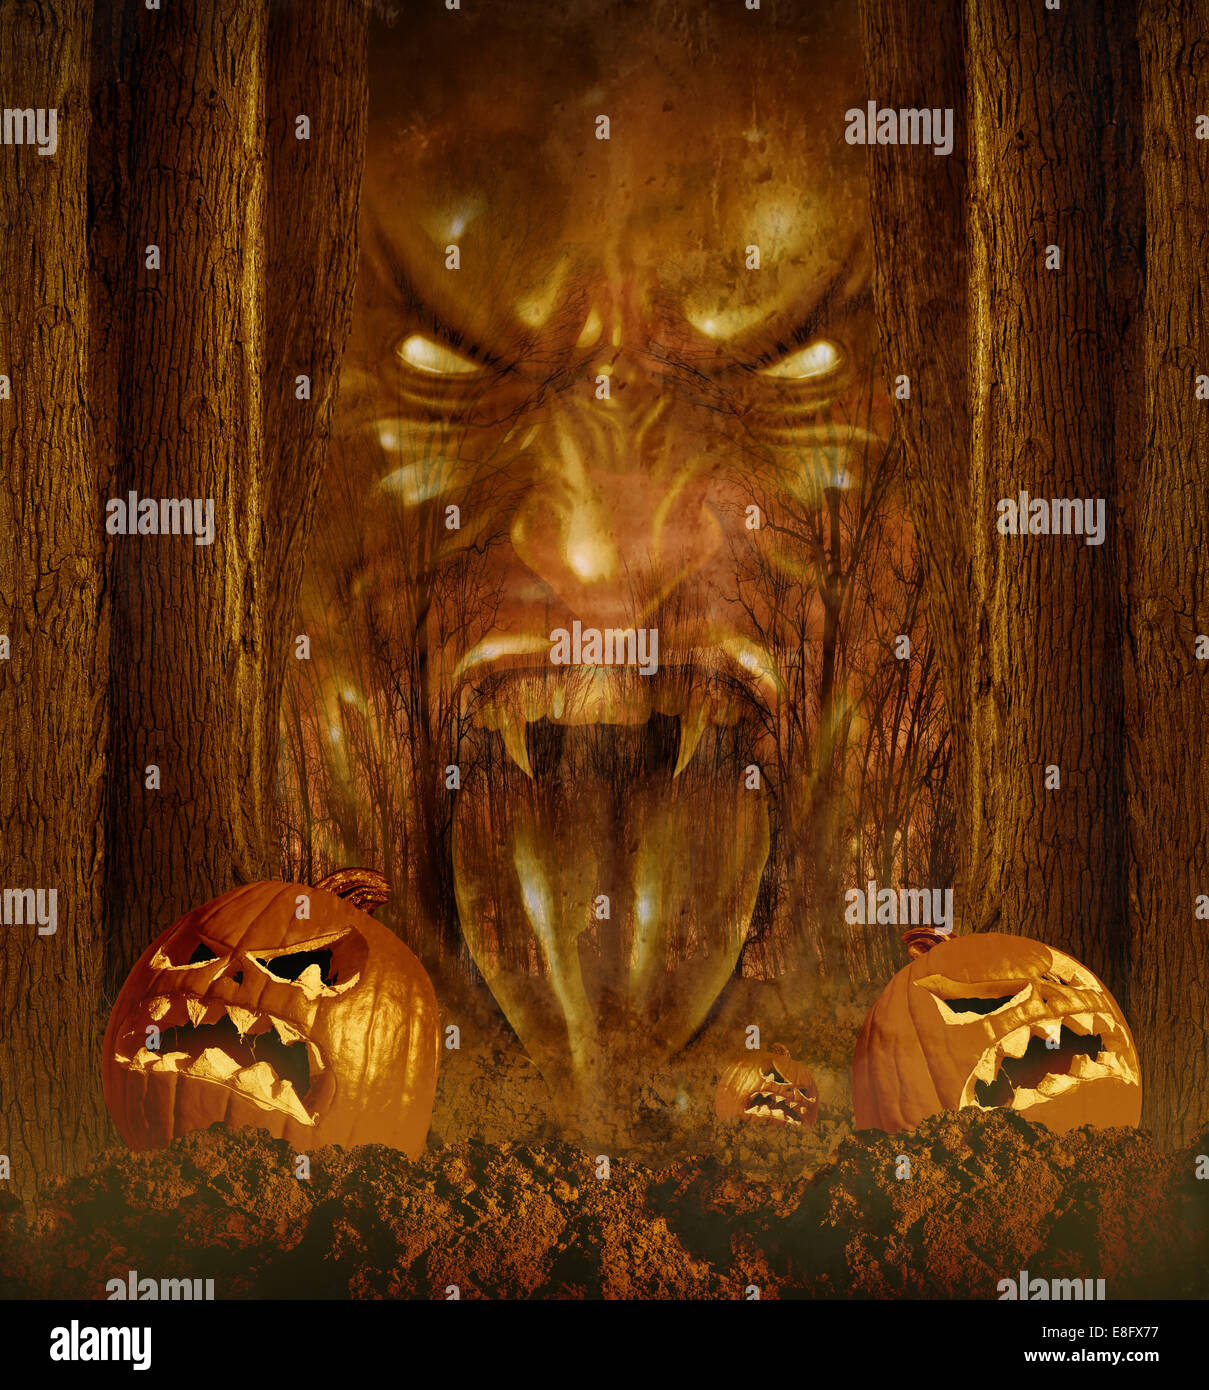 Halloween ghost concept as a creepy scary phantom appearing through a dark haunted forest with jack o lantern pumpkins on an autumn night . Stock Photo